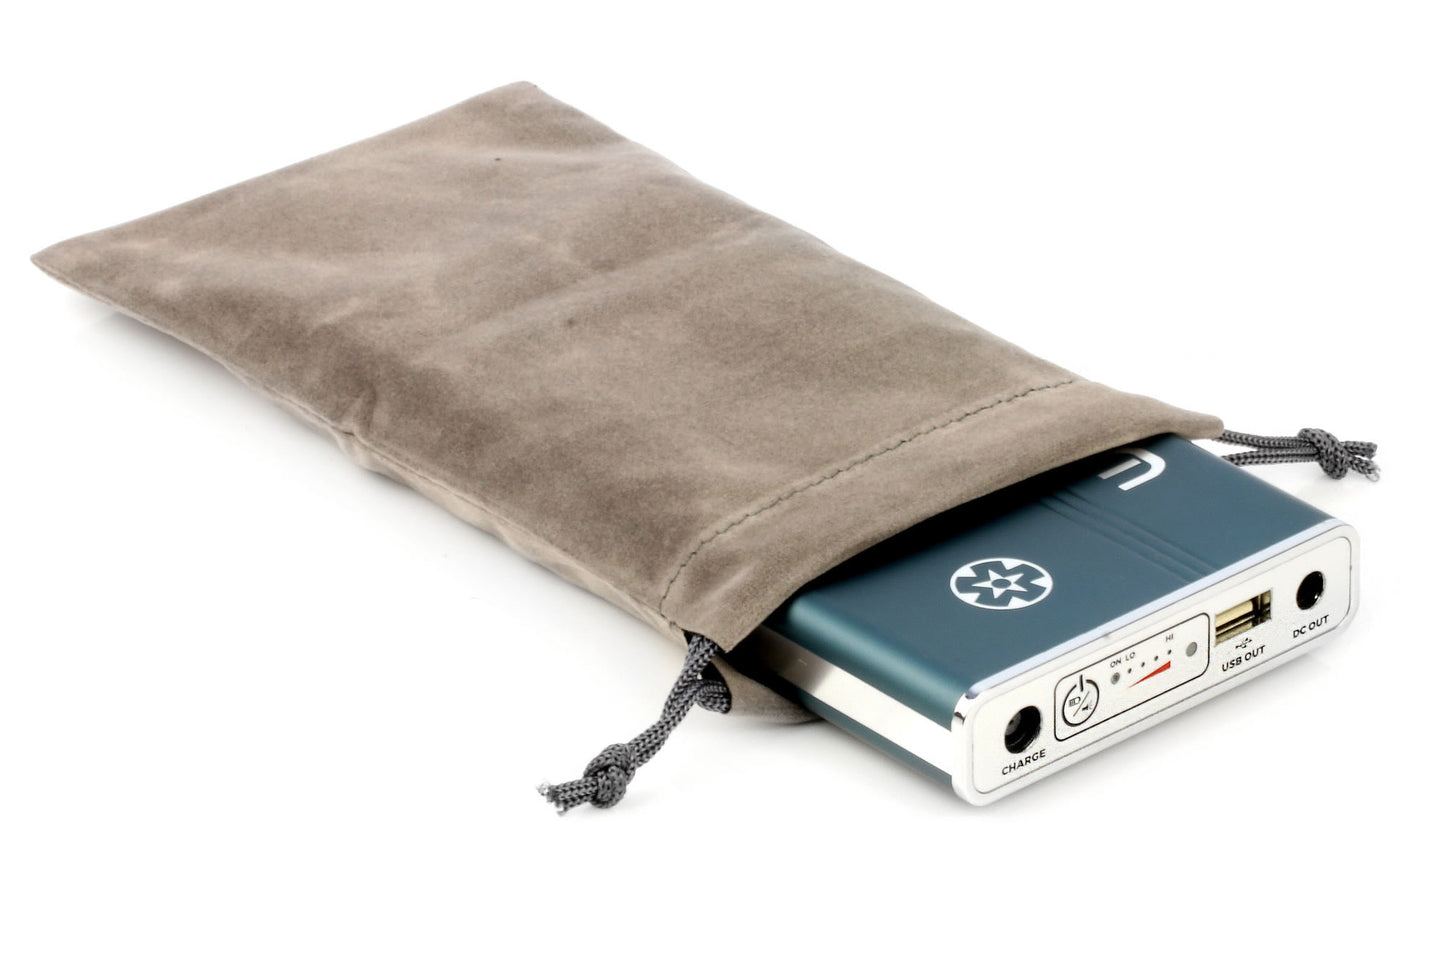 Medistrom™ Pilot-24 Lite Battery and Backup Power Supply for 24V PAP Devices.